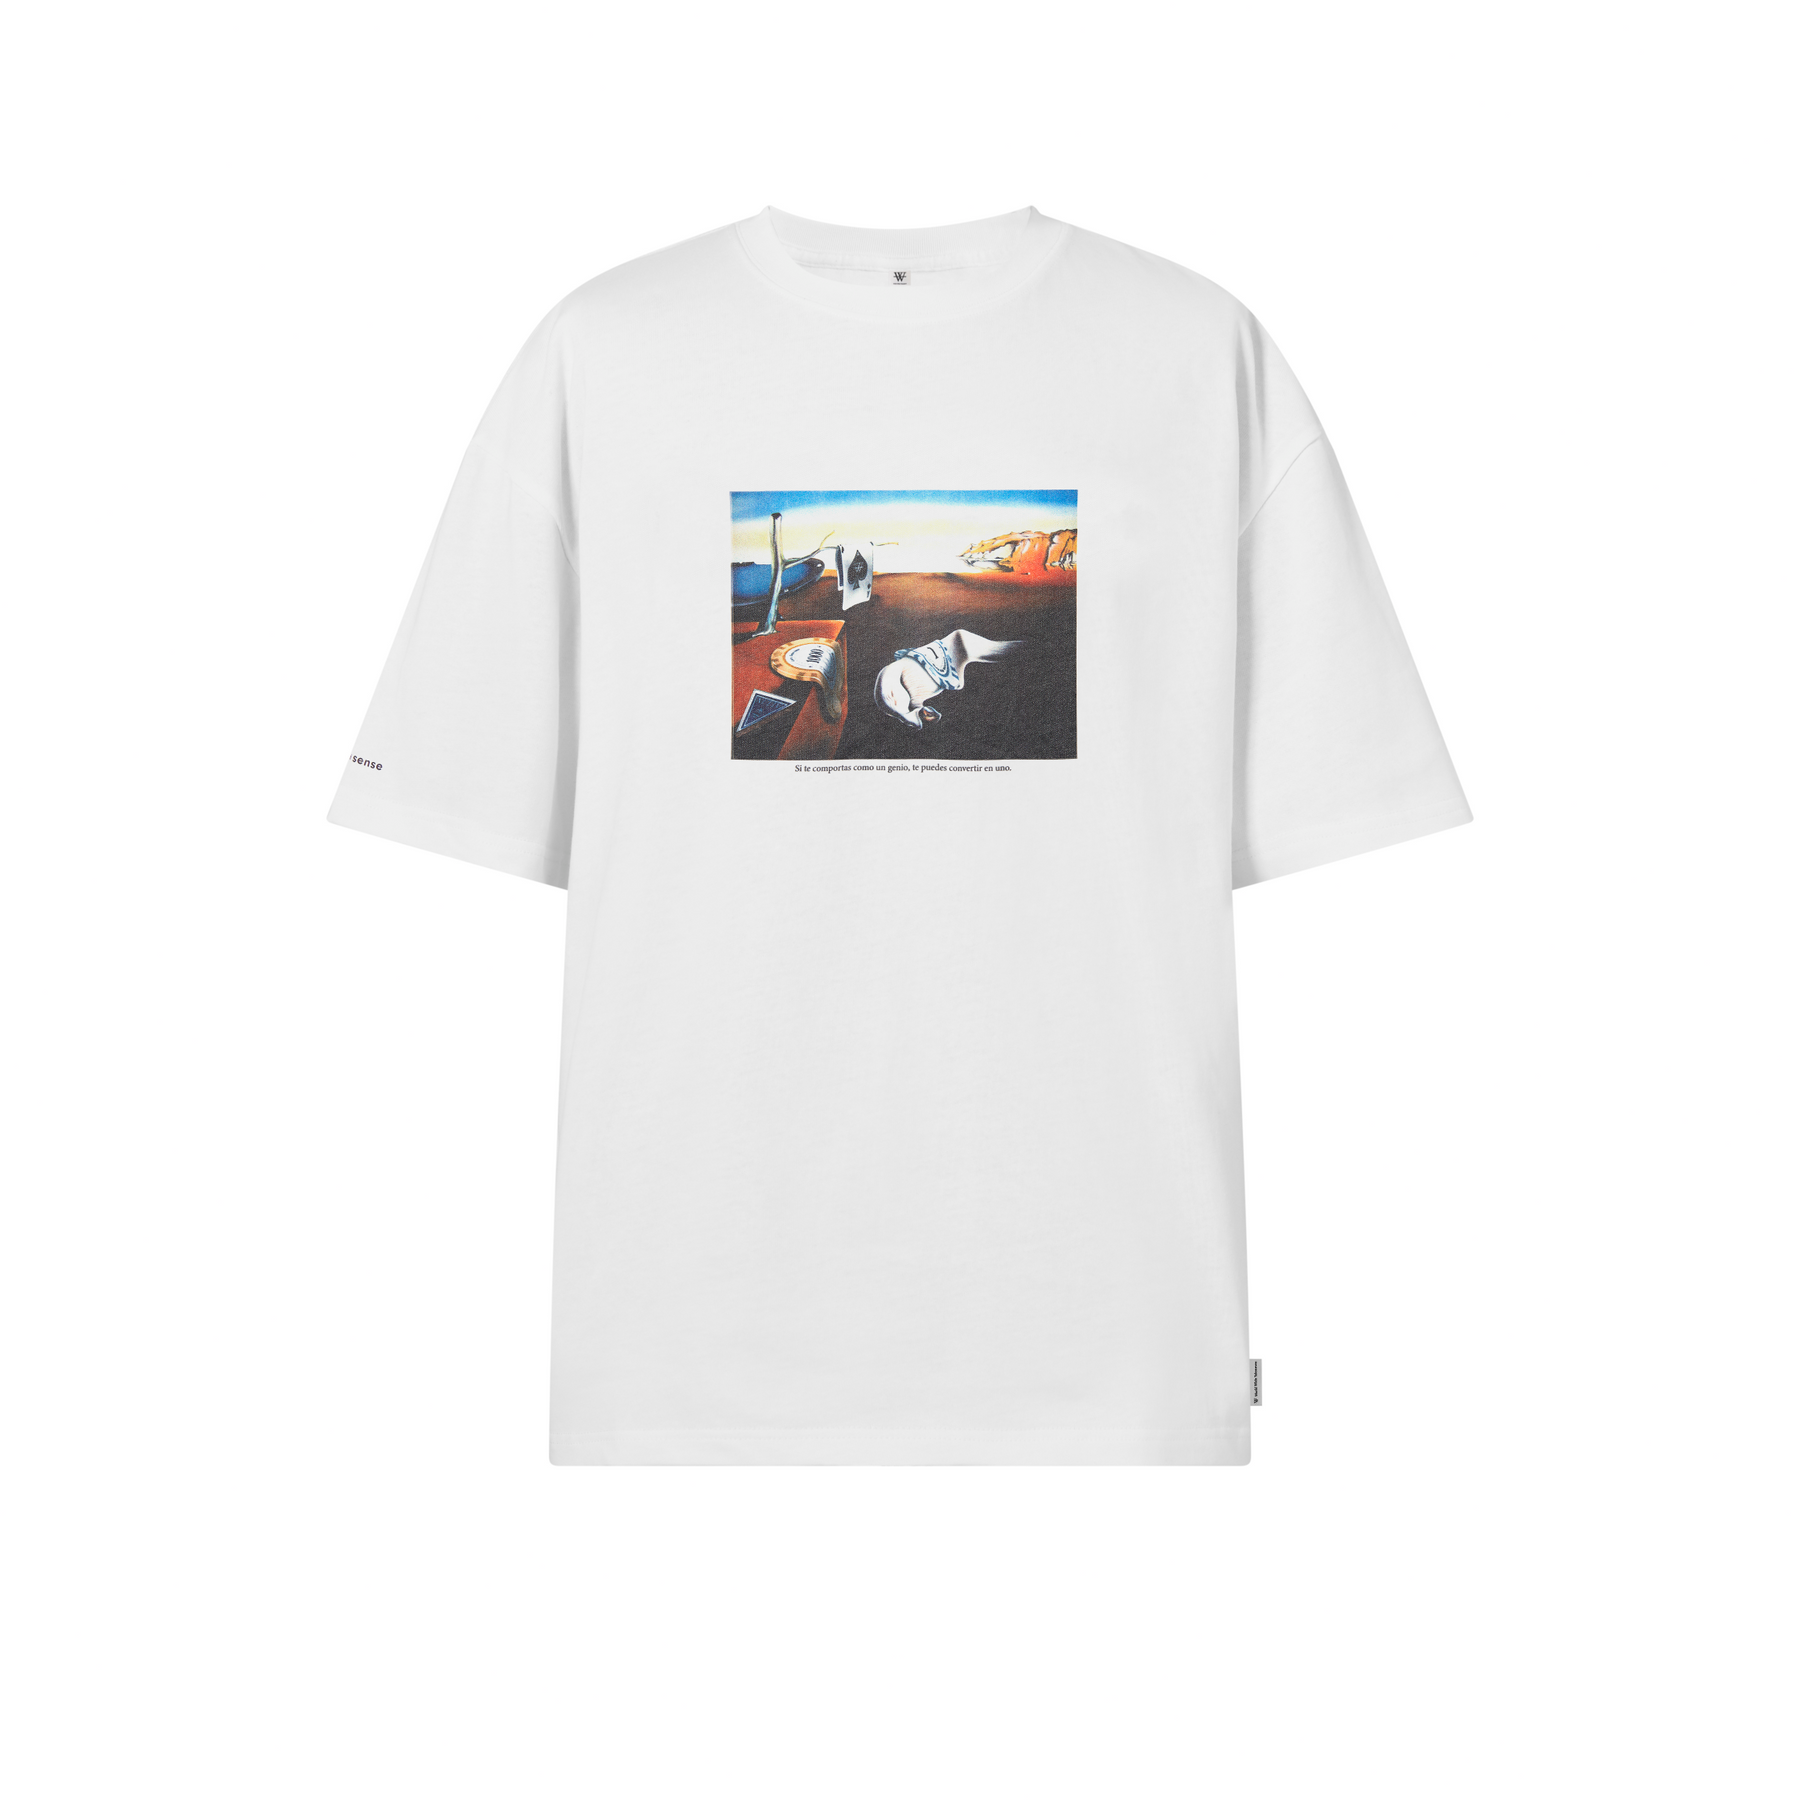 Tシャツ“Dali 「The Persistence of Memory」”ホワイト – World Wide ...